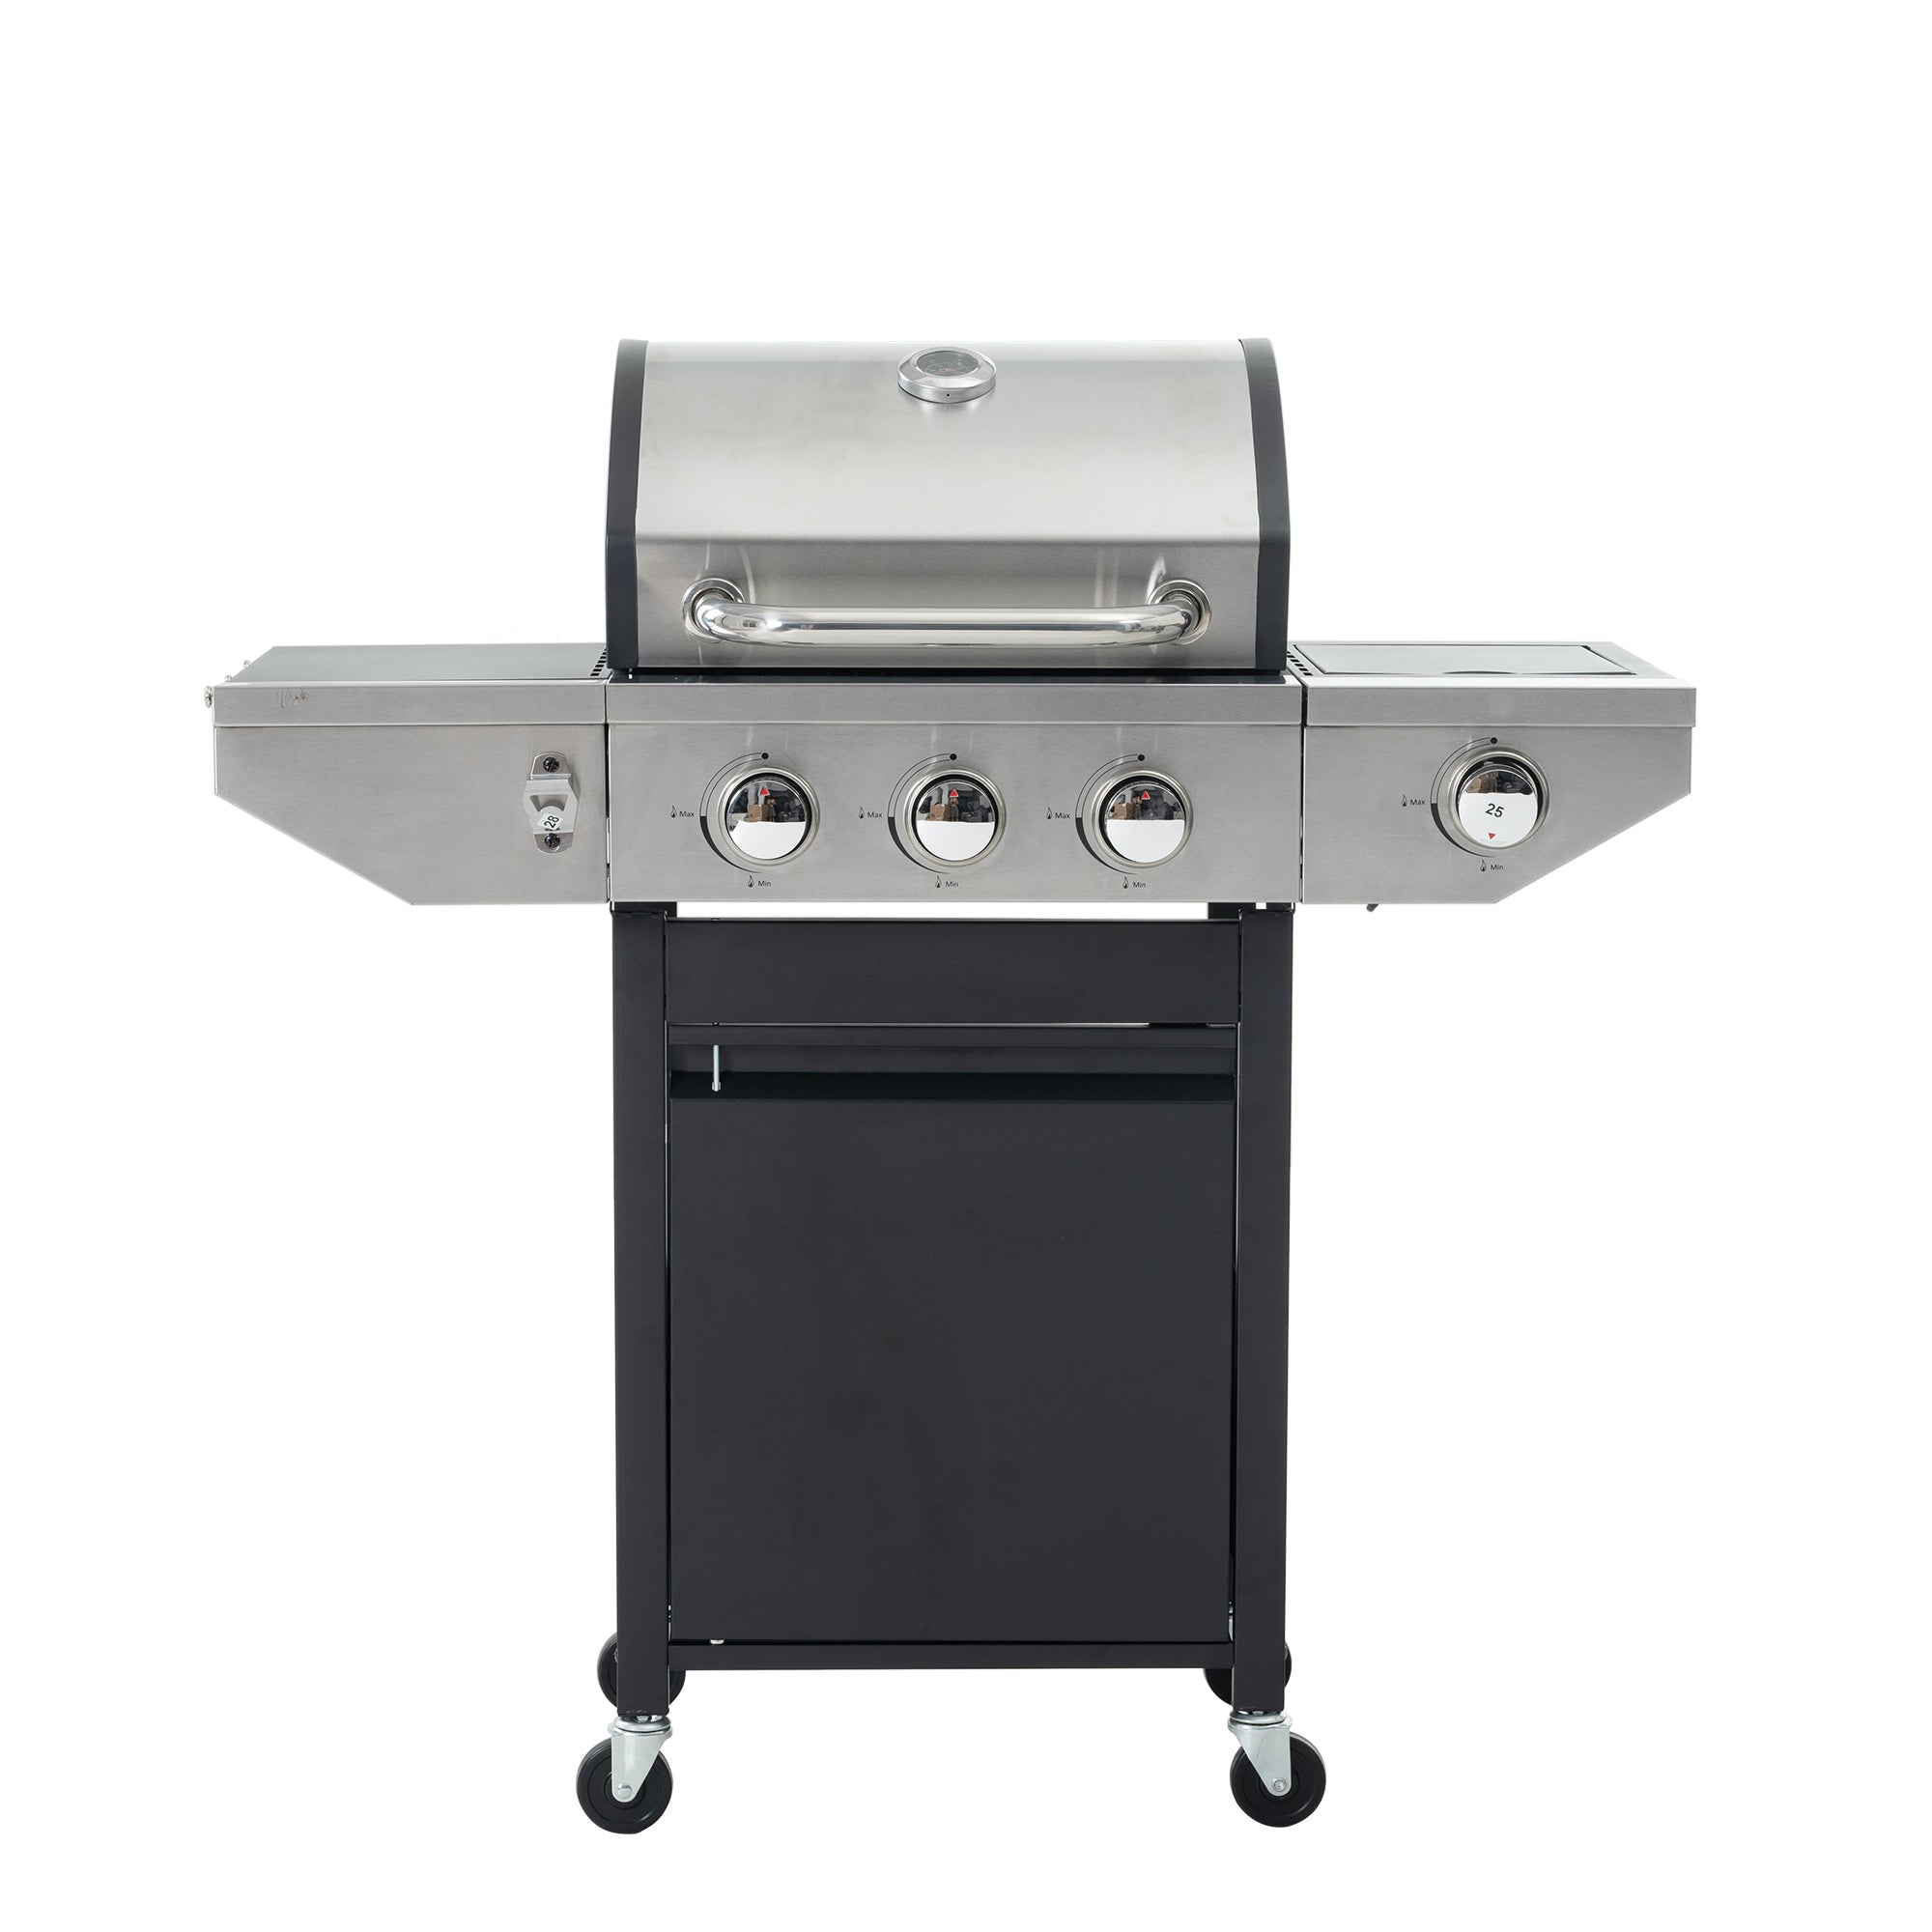 Propane Grill 3 Burner Barbecue Grill Stainless Steel Gas Grill with Side Burner and Thermometer for Outdoor BBQ, Camping